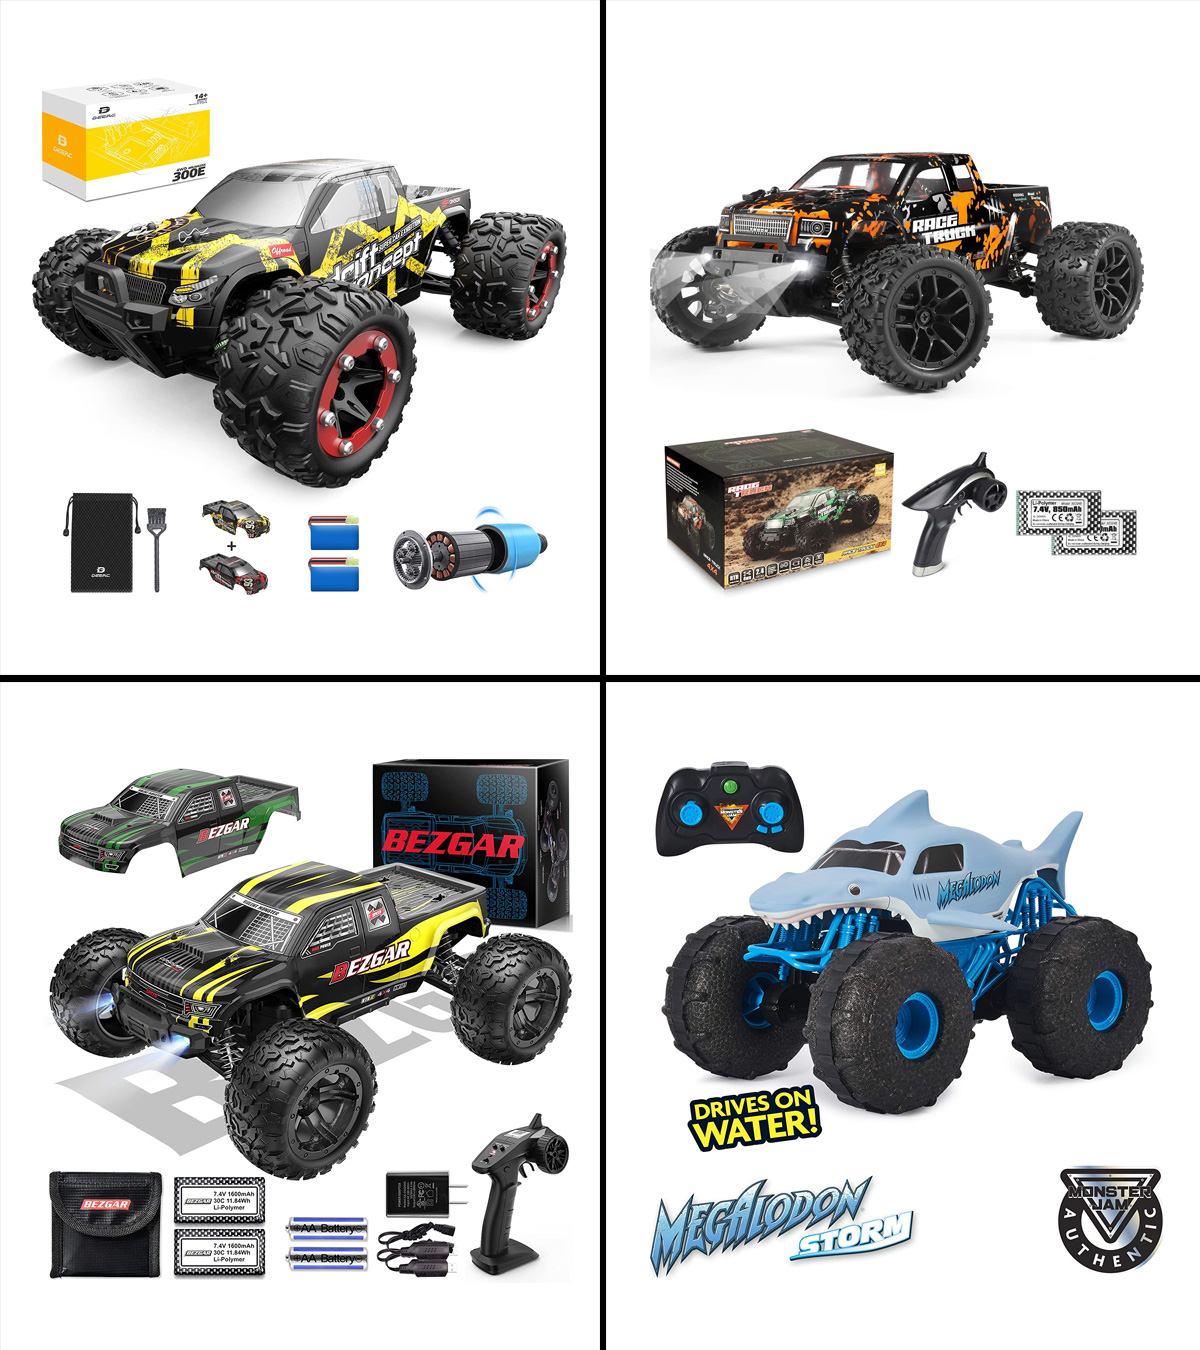 World's Smallest R/C Car - Junction Hobbies and Toys